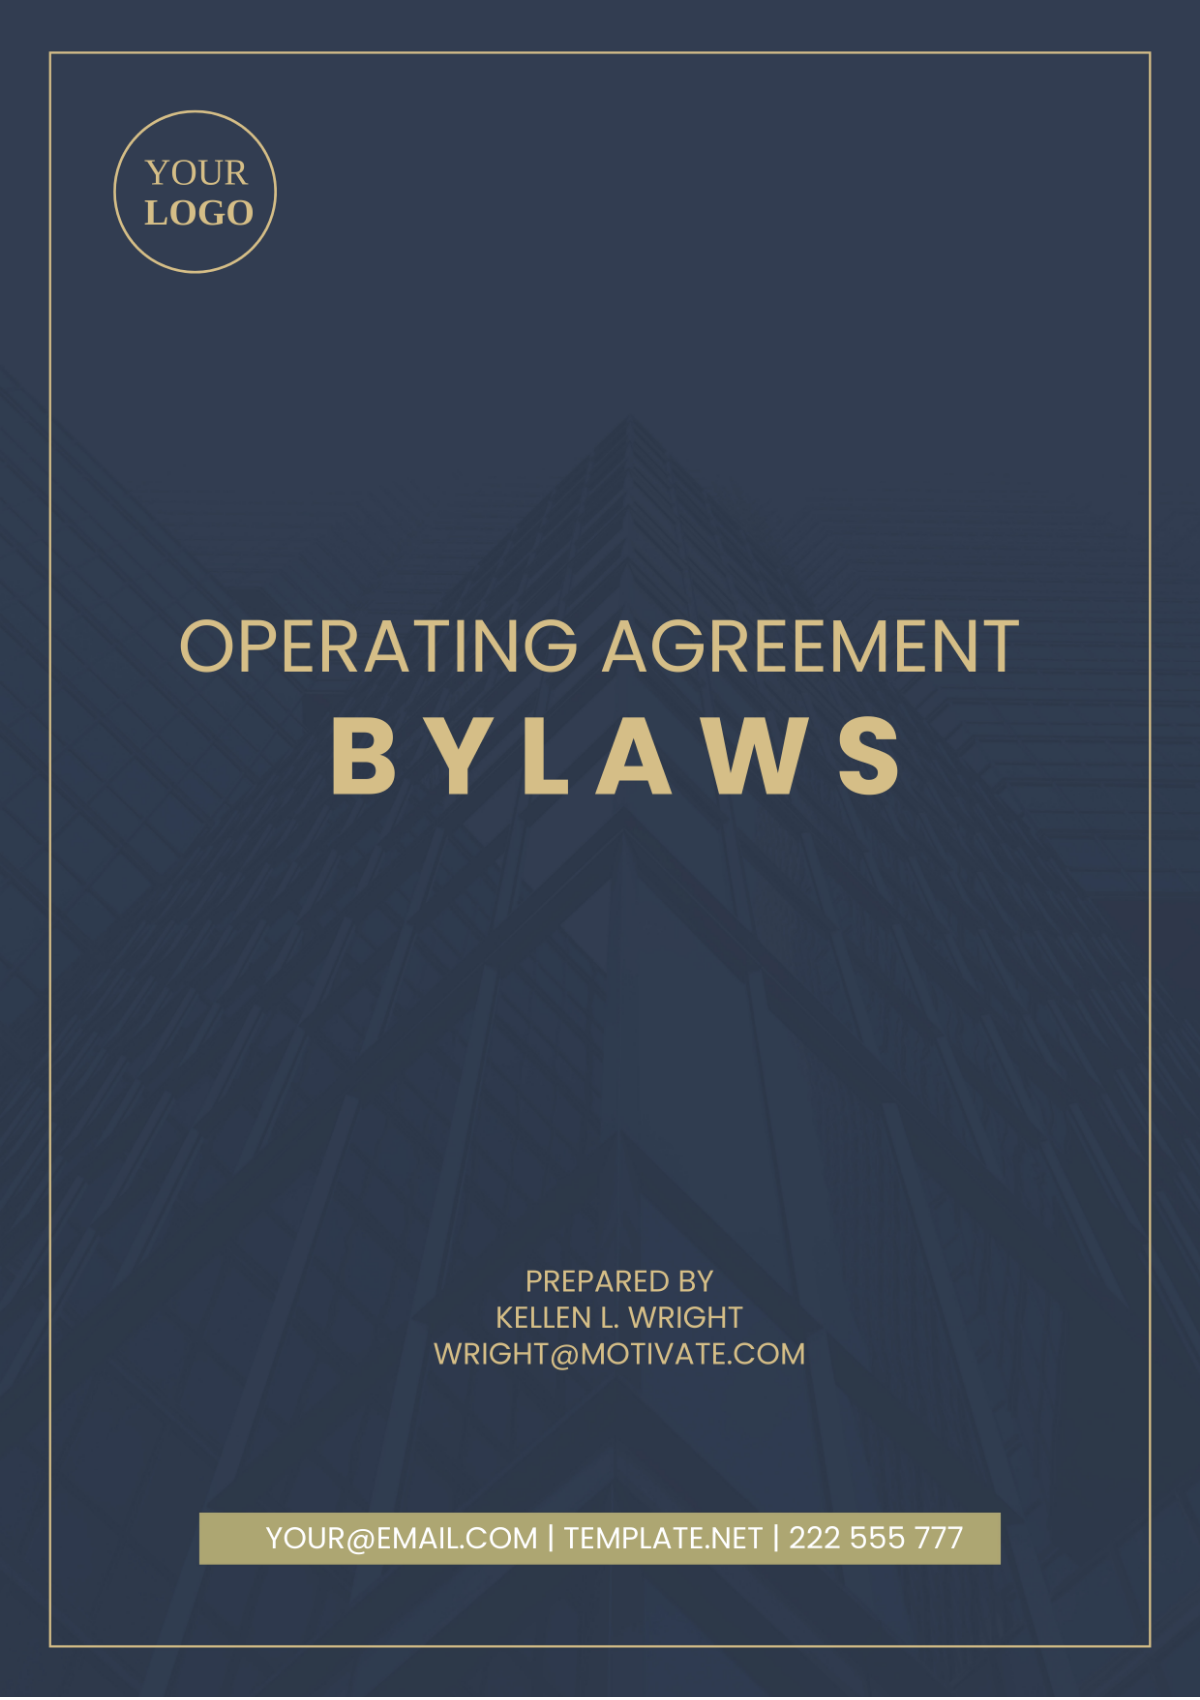 Free Bylaws Operating Agreement Template